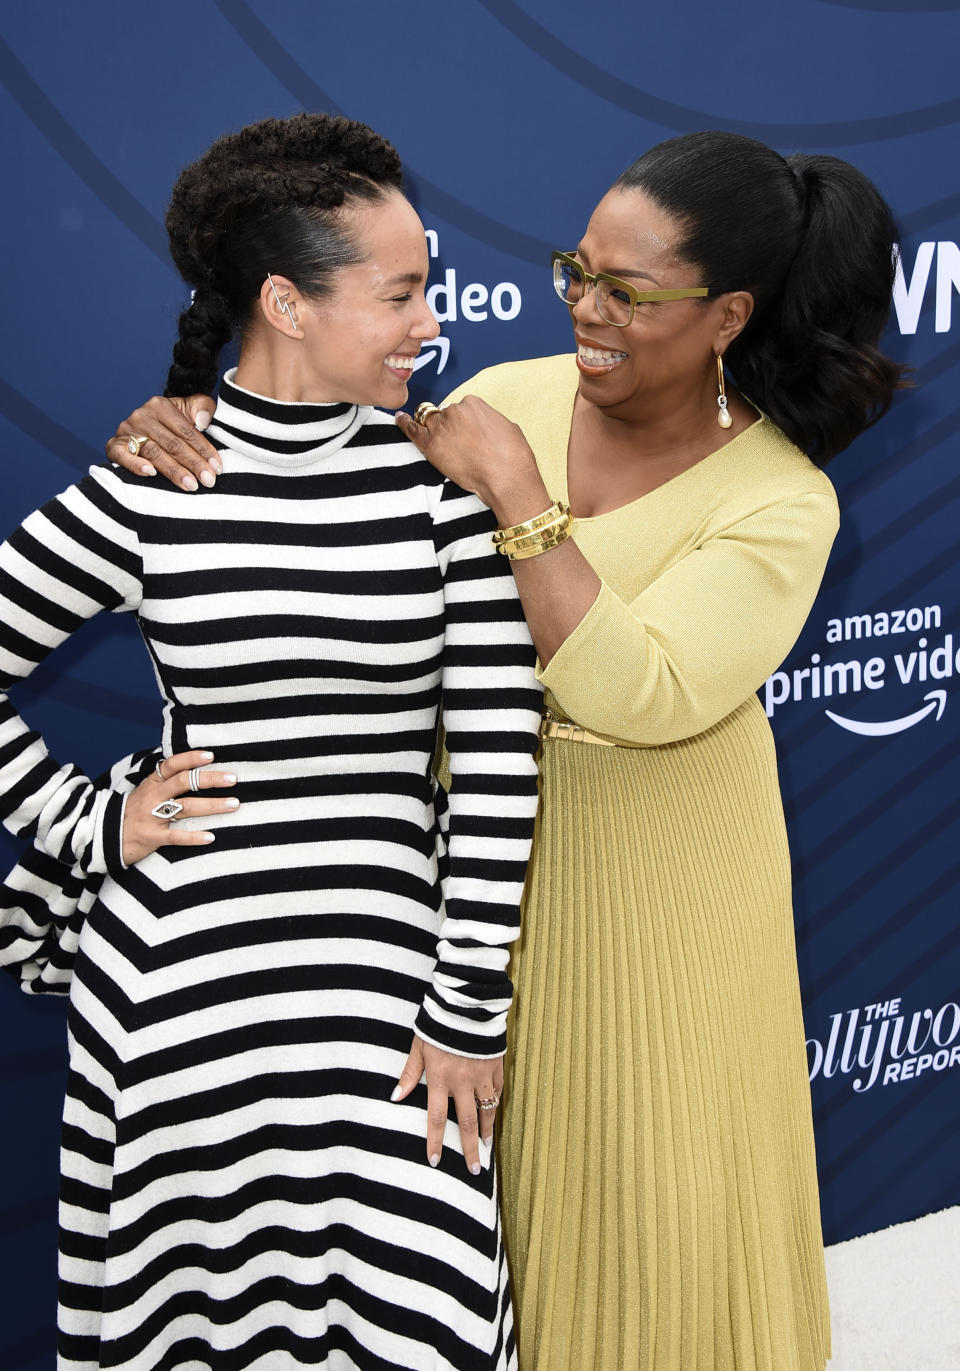 FILE - This April 30, 2019 file photo shows musician Alicia Keys, left, and Oprah Winfrey at The Hollywood Reporter's Empowerment in Entertainment Gala in Los Angeles. Keys' memoir "More Myself" will be released on Tuesday, March 31. (Photo by Jordan Strauss/Invision/AP, File)